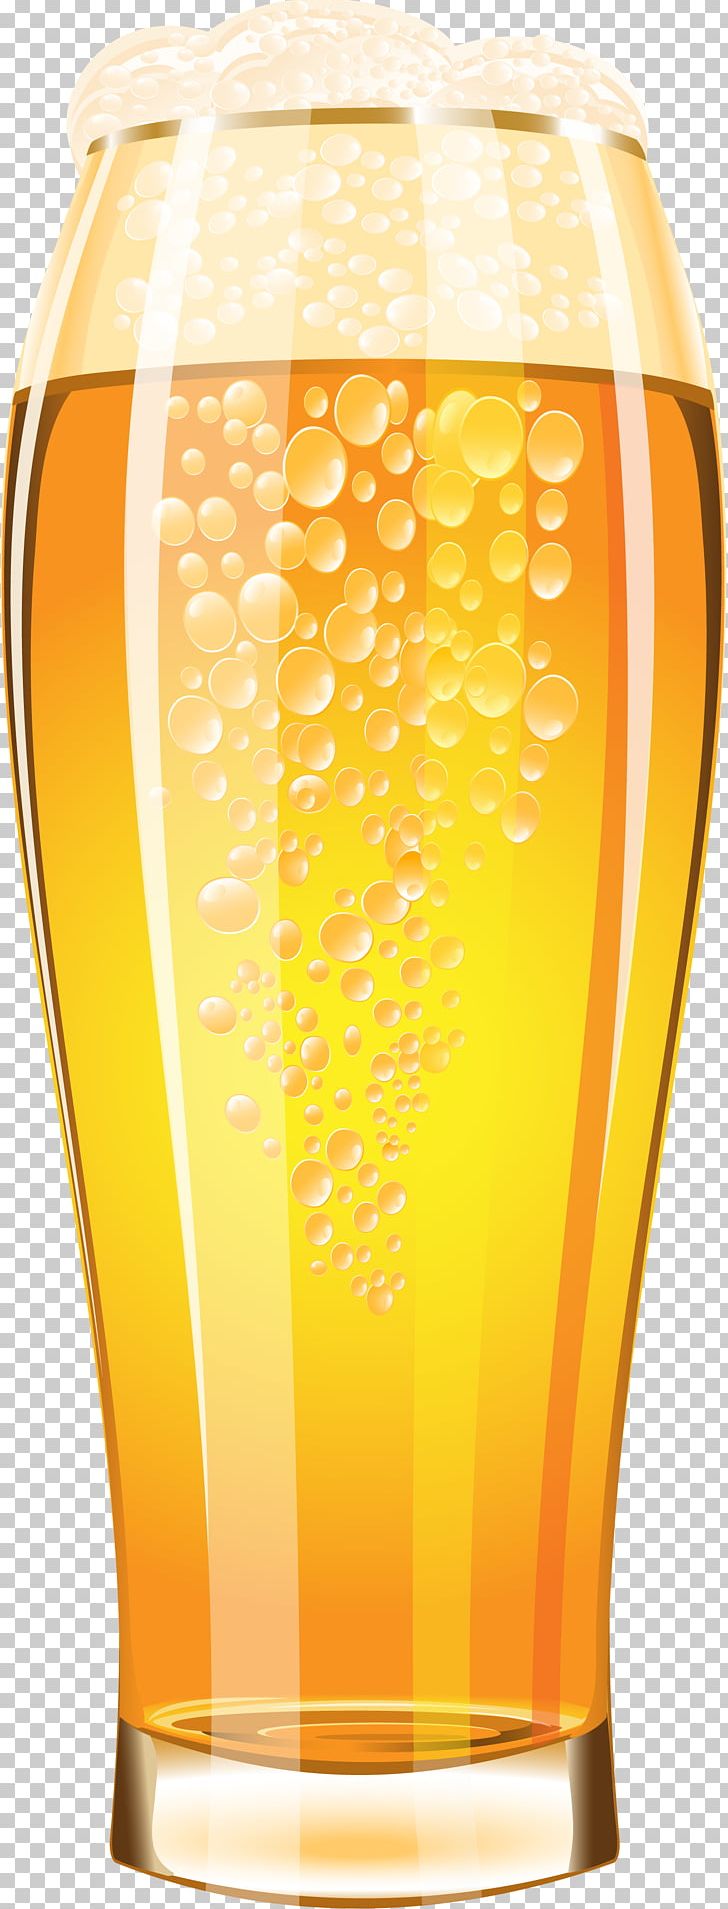 Beer Glasses Cocktail Pint Glass PNG, Clipart, Alcoholic Drink, Beer, Beer Bottle, Beer Glass, Beer Glasses Free PNG Download